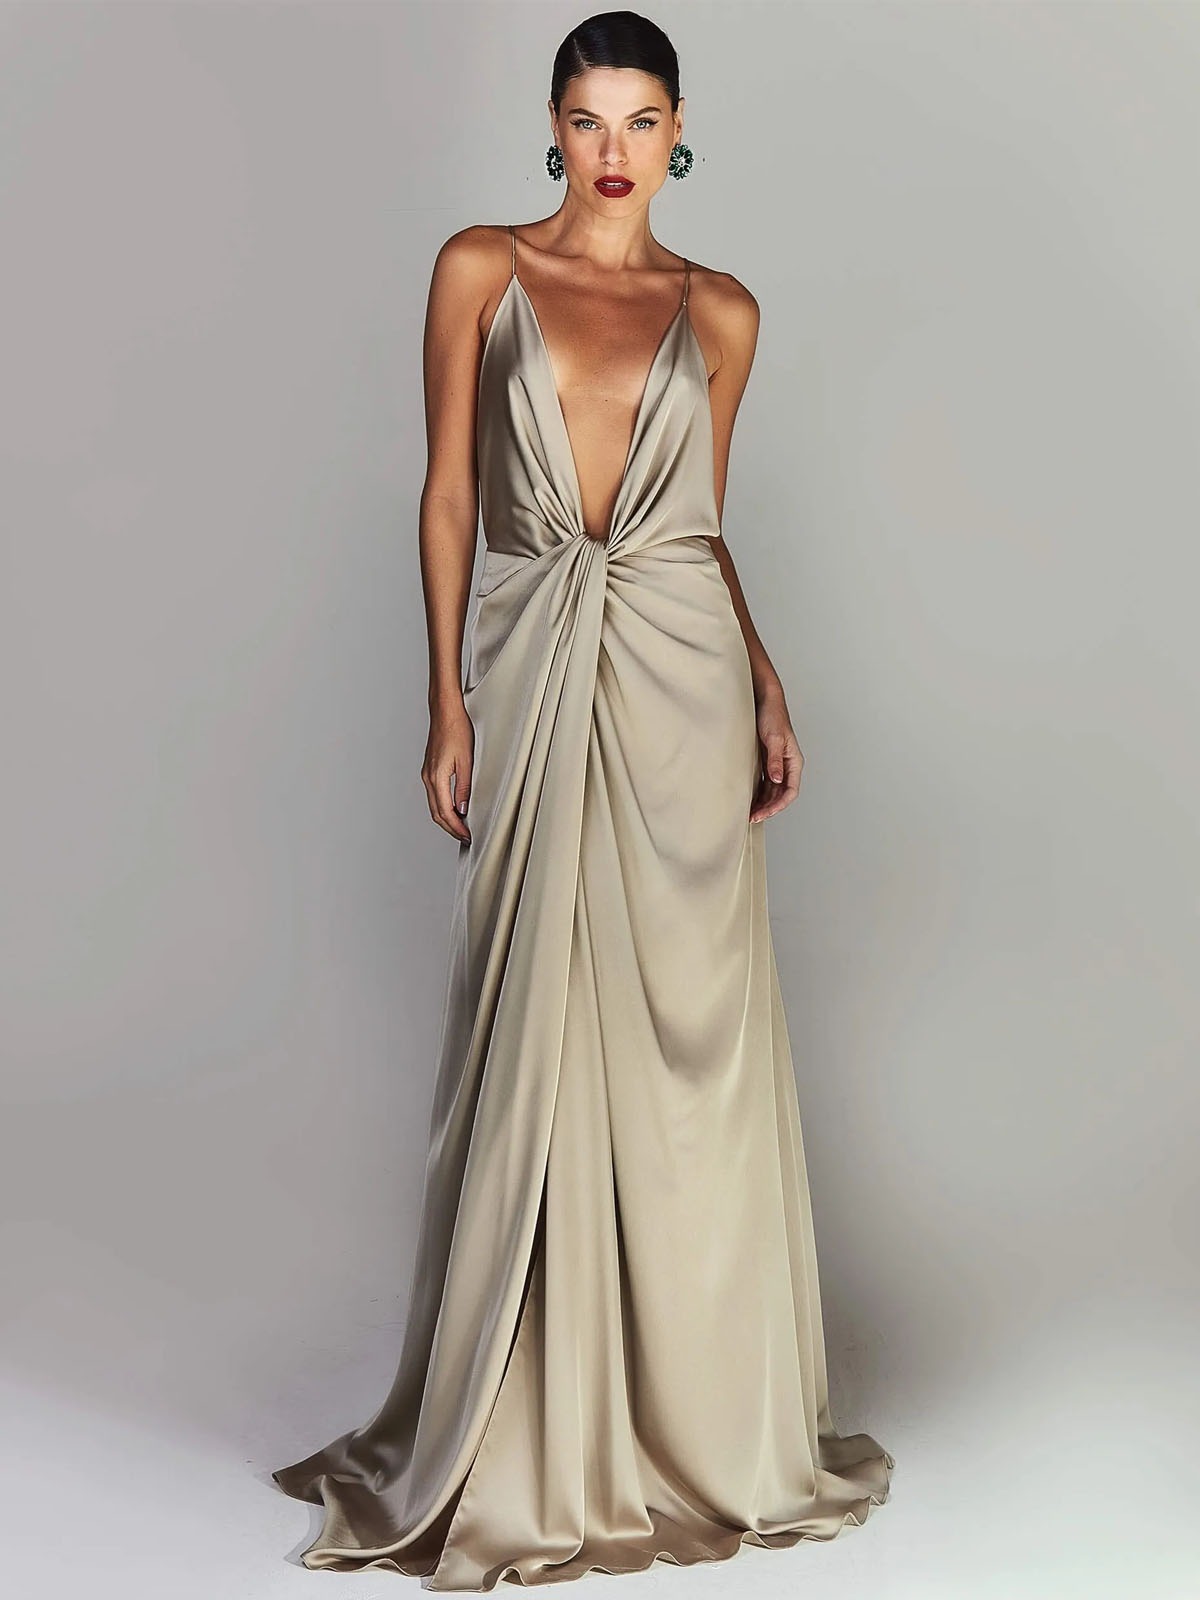 LONG SATIN PARTY DRESS WITH NECKLINE